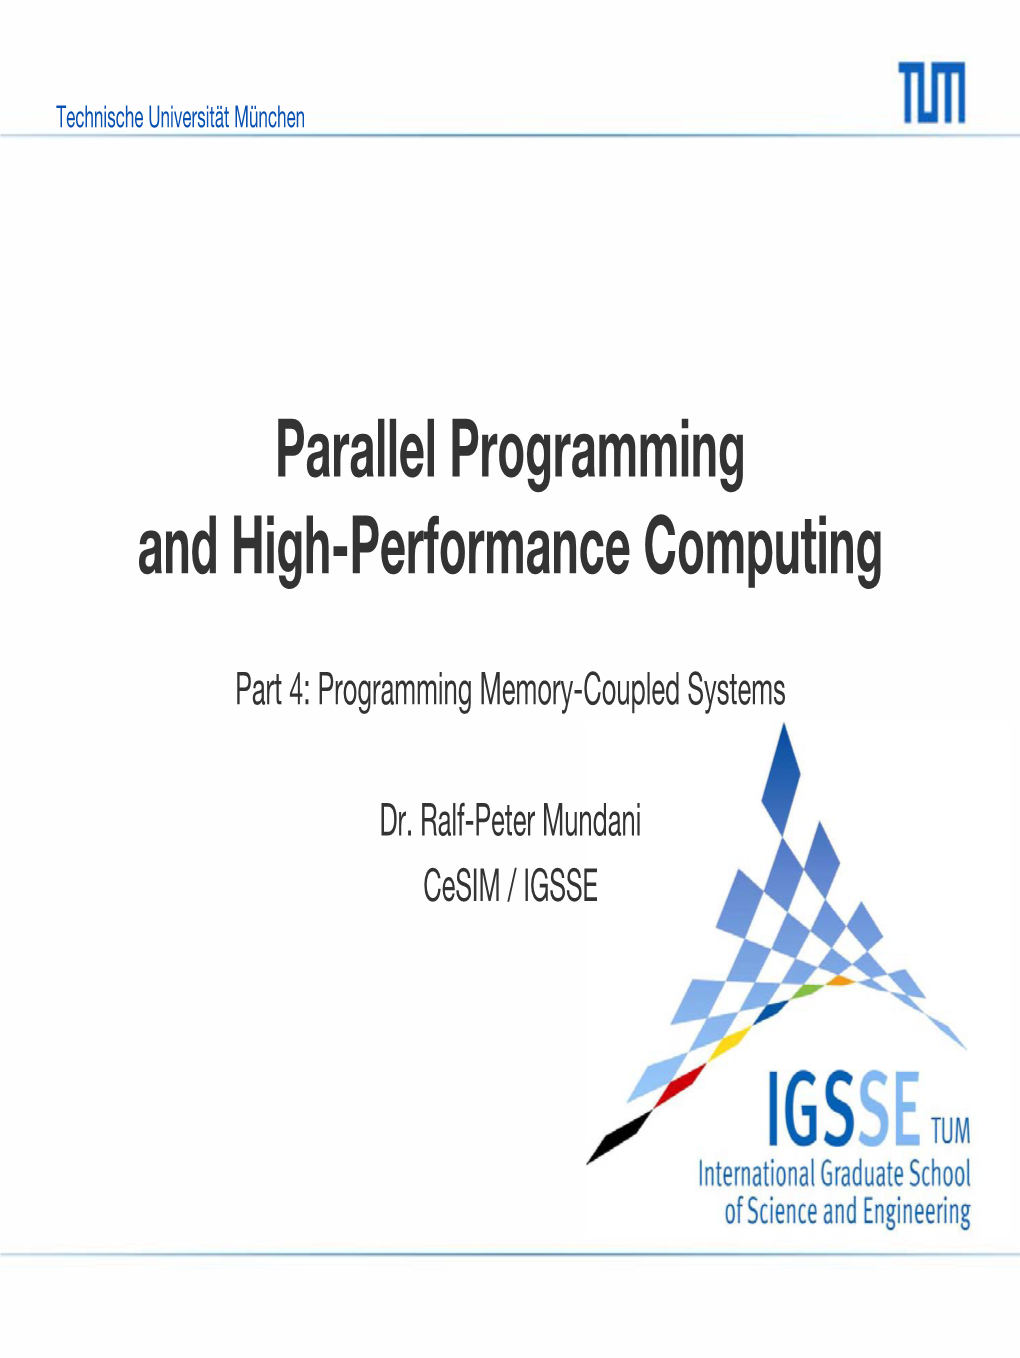 Parallel Programming and High-Performance Computing